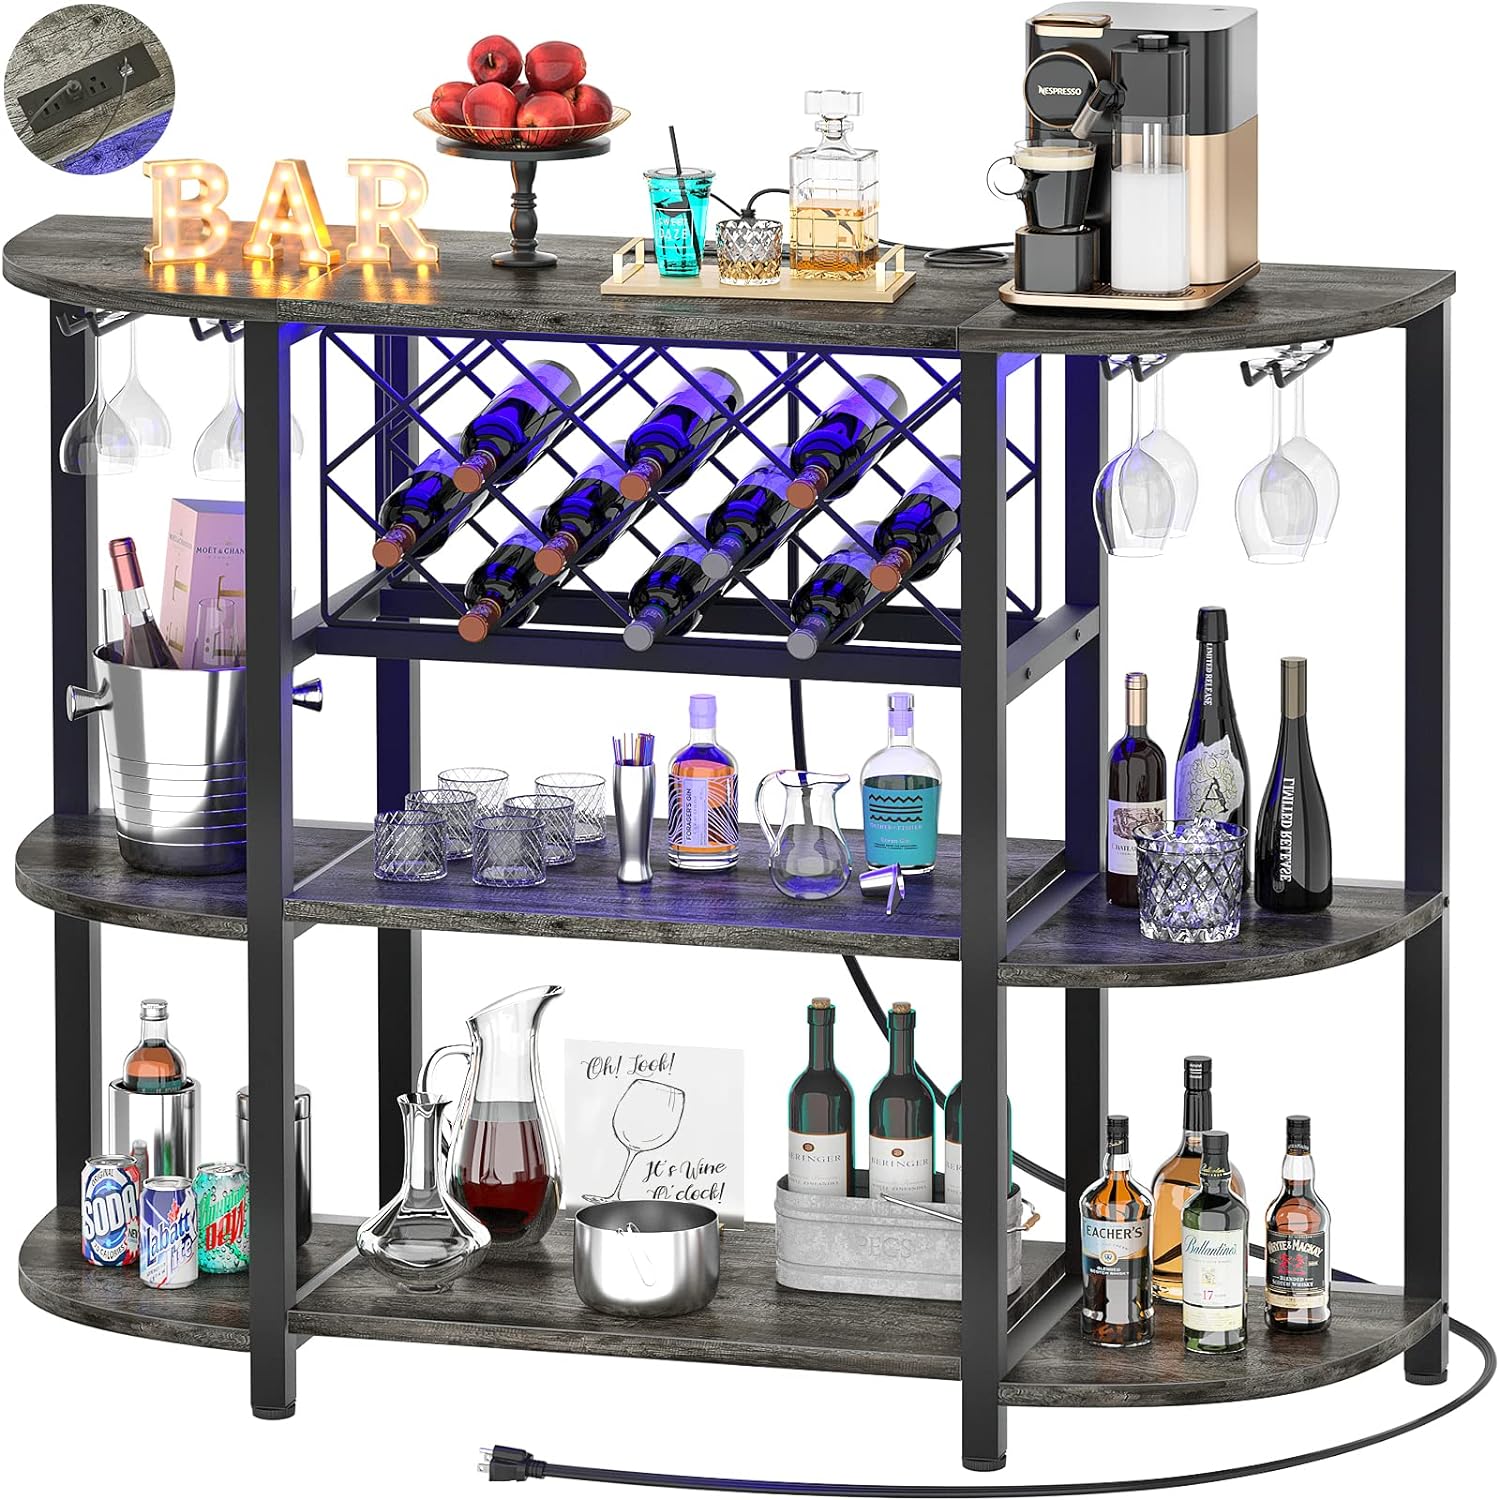 Unikito 4-Tier Metal Coffee Bar Cabinet with Outlet and LED Light, Freestanding Floor Bar Table for Liquor with Glass Holder and Wine Rack Storage, Wine Bakers Rack for Kitchen Dining Room, Gray Oak